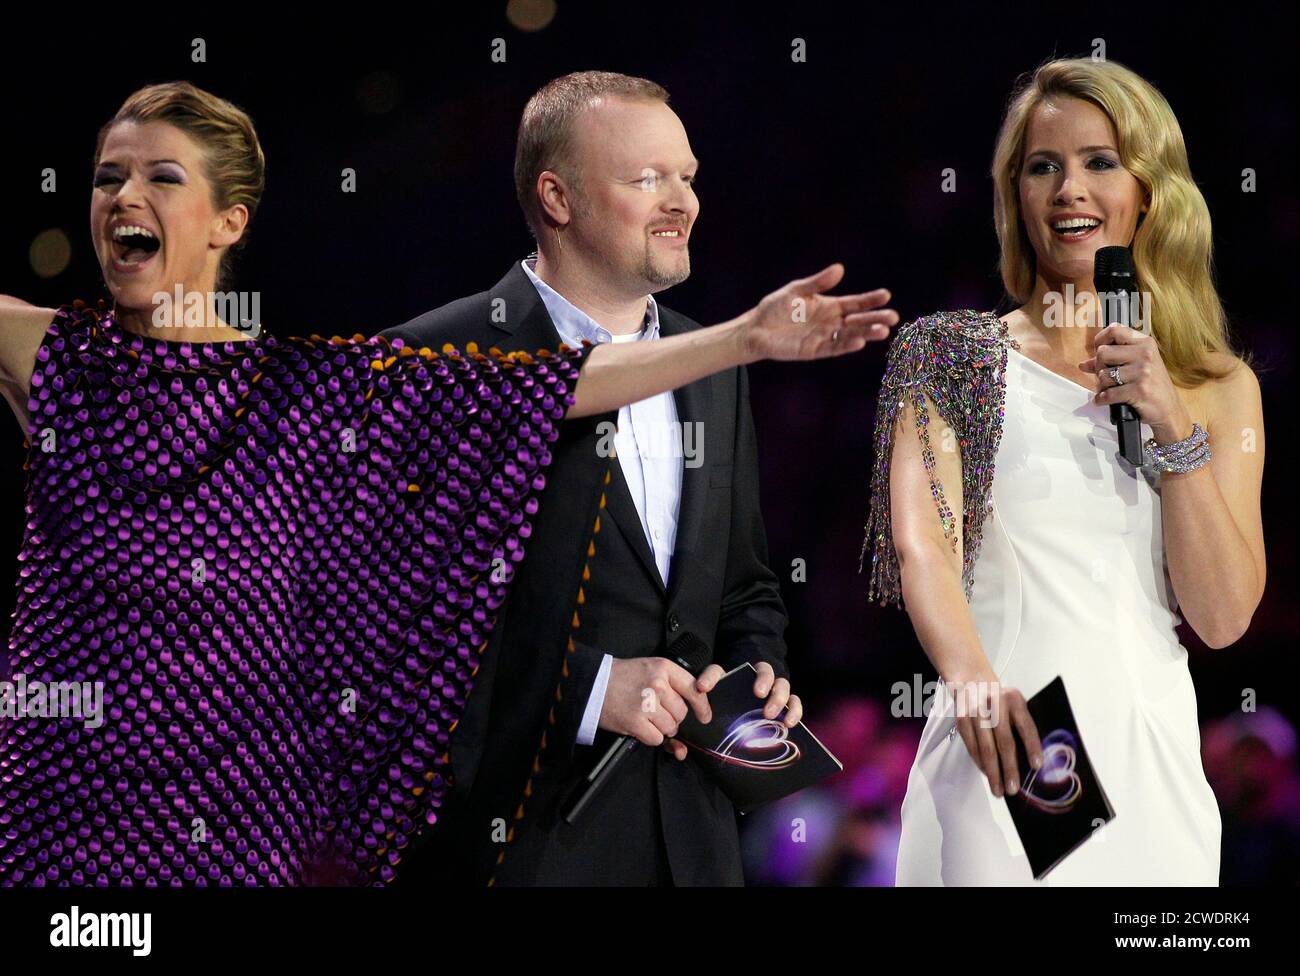 German TV entertainers and host of the Eurovision, Judith Rakers (R) Stefan Raab and Anke Engelke (L) pose during the first semi-final for the Eurovison Song Contest in Duesseldorf May 10, 2011. The 2011 Eurovison Song Contest will be held in the western German city of Duesseldorf on May 14.       REUTERS/Wolfgang Rattay (GERMANY  - Tags: ENTERTAINMENT) Stock Photo